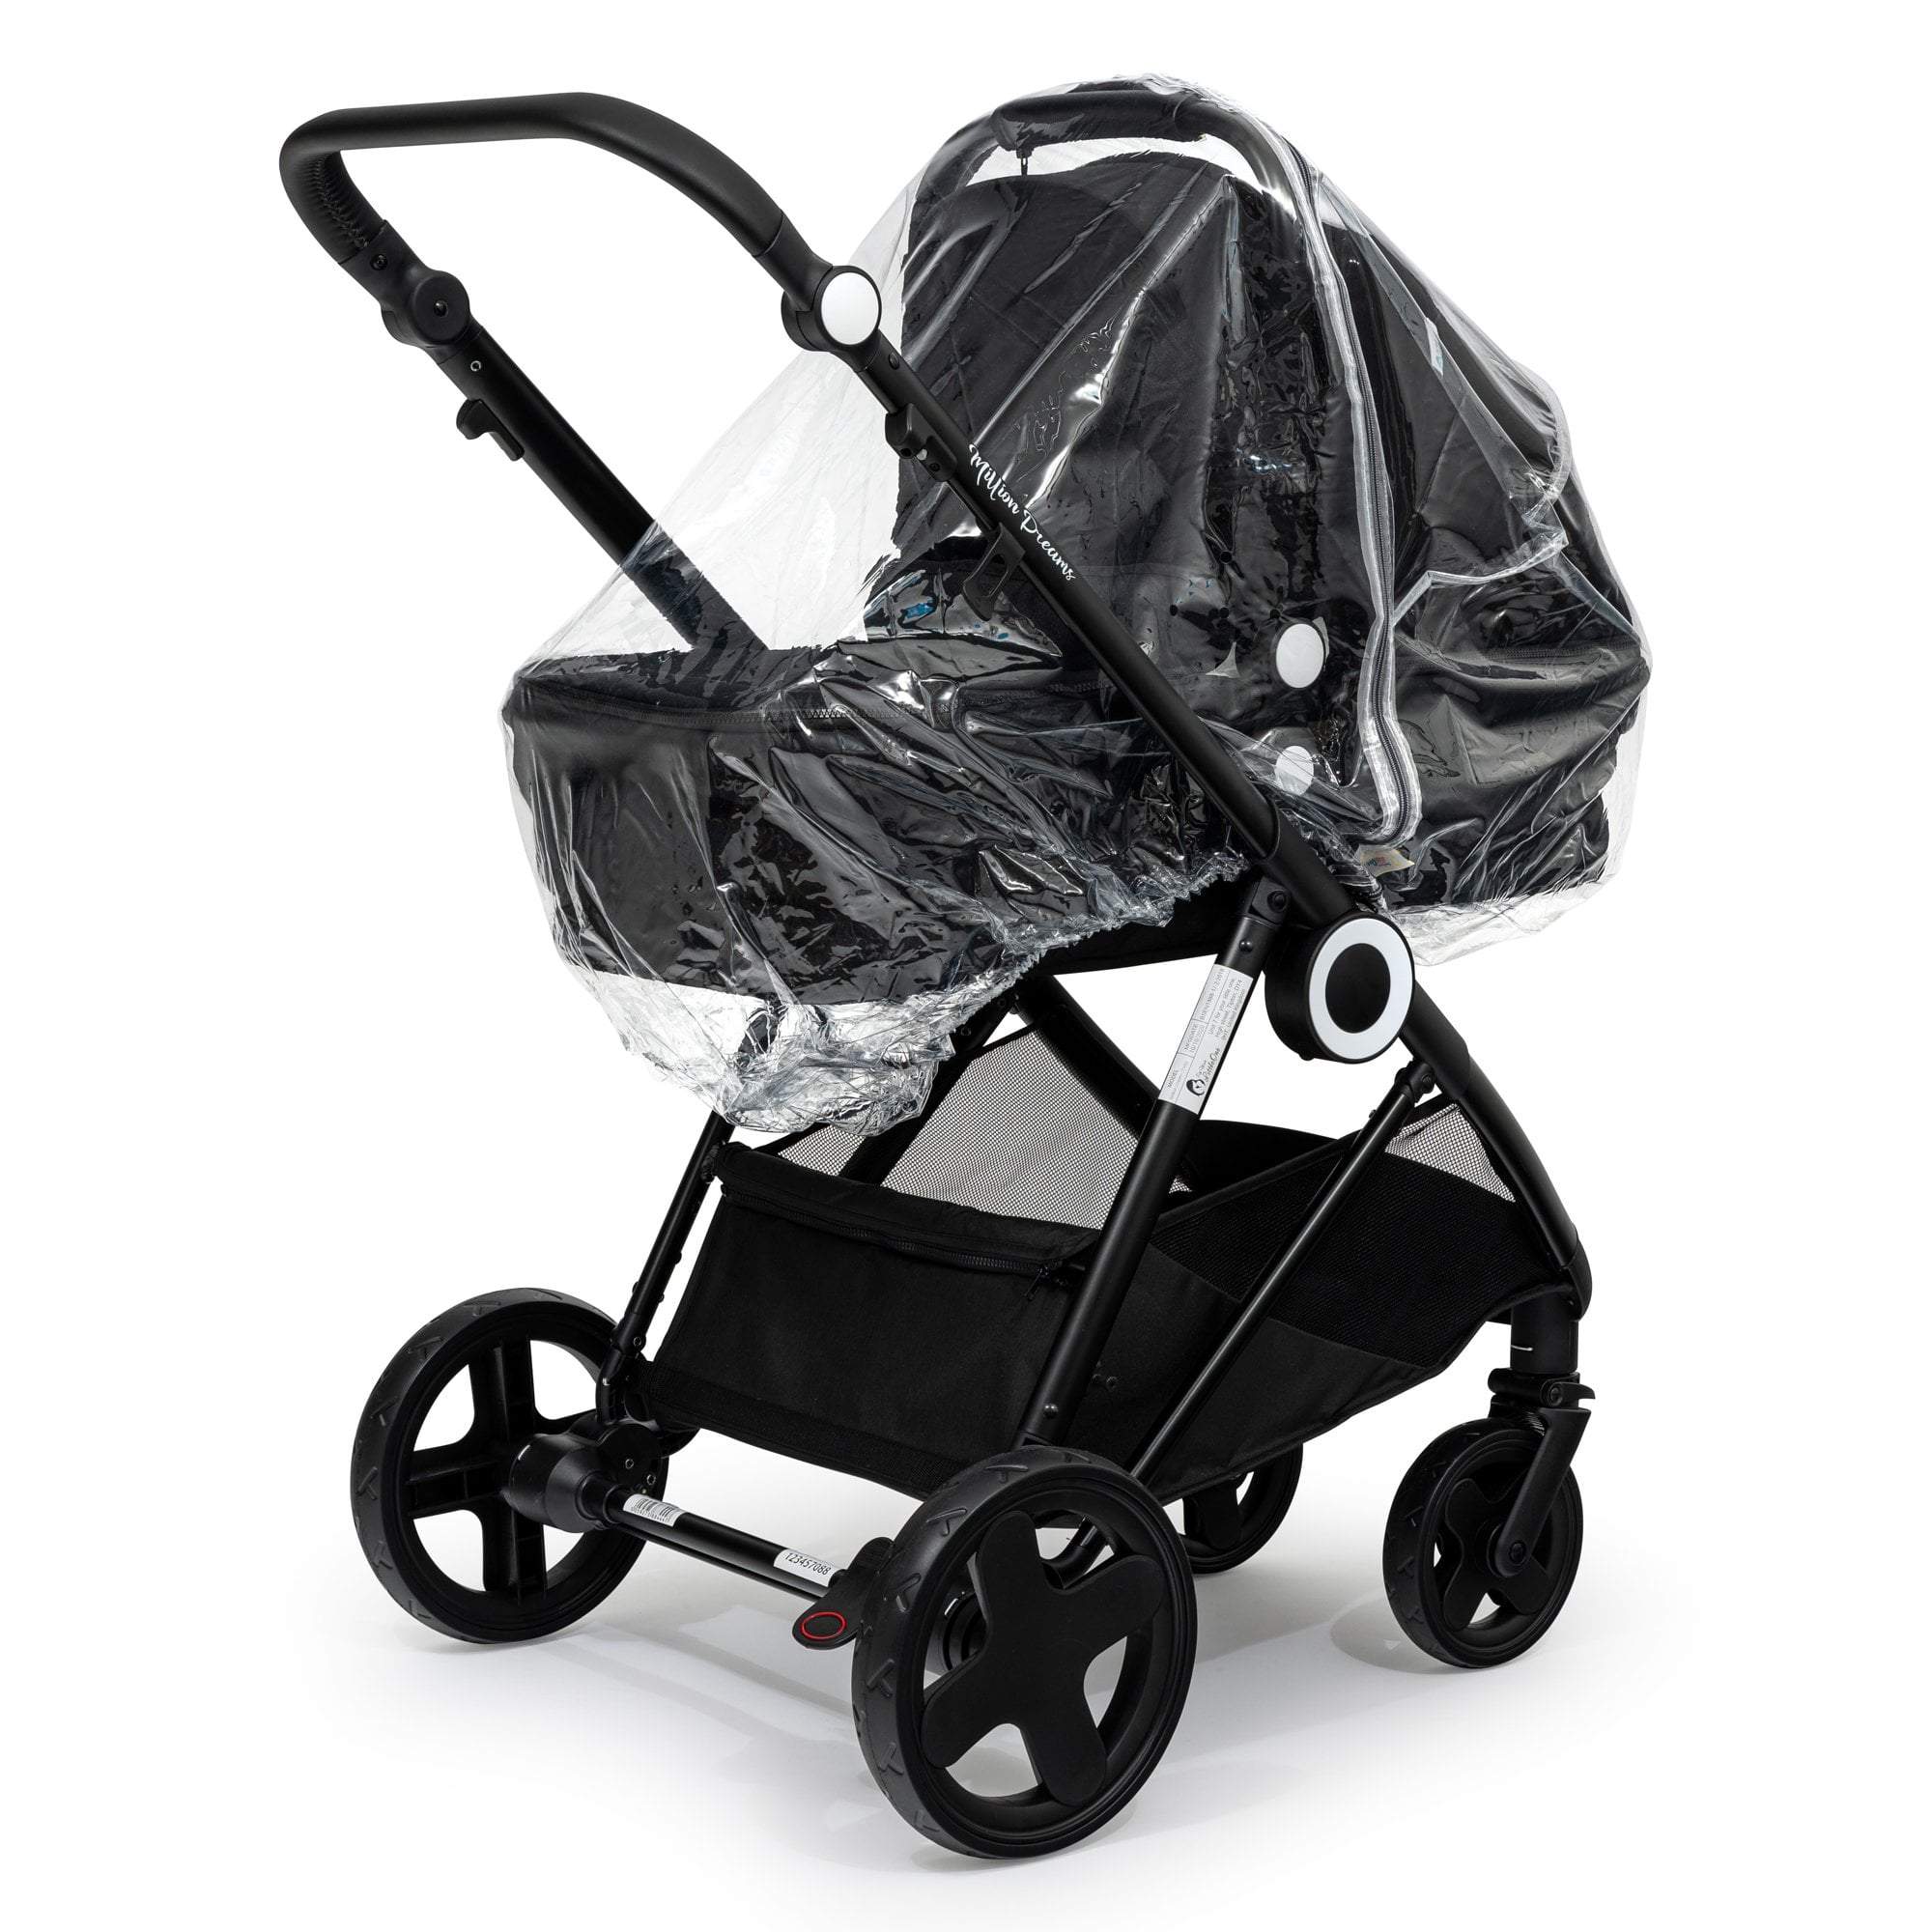 Carrycot Raincover Compatible With Baby Trend - Fits All Models - For Your Little One